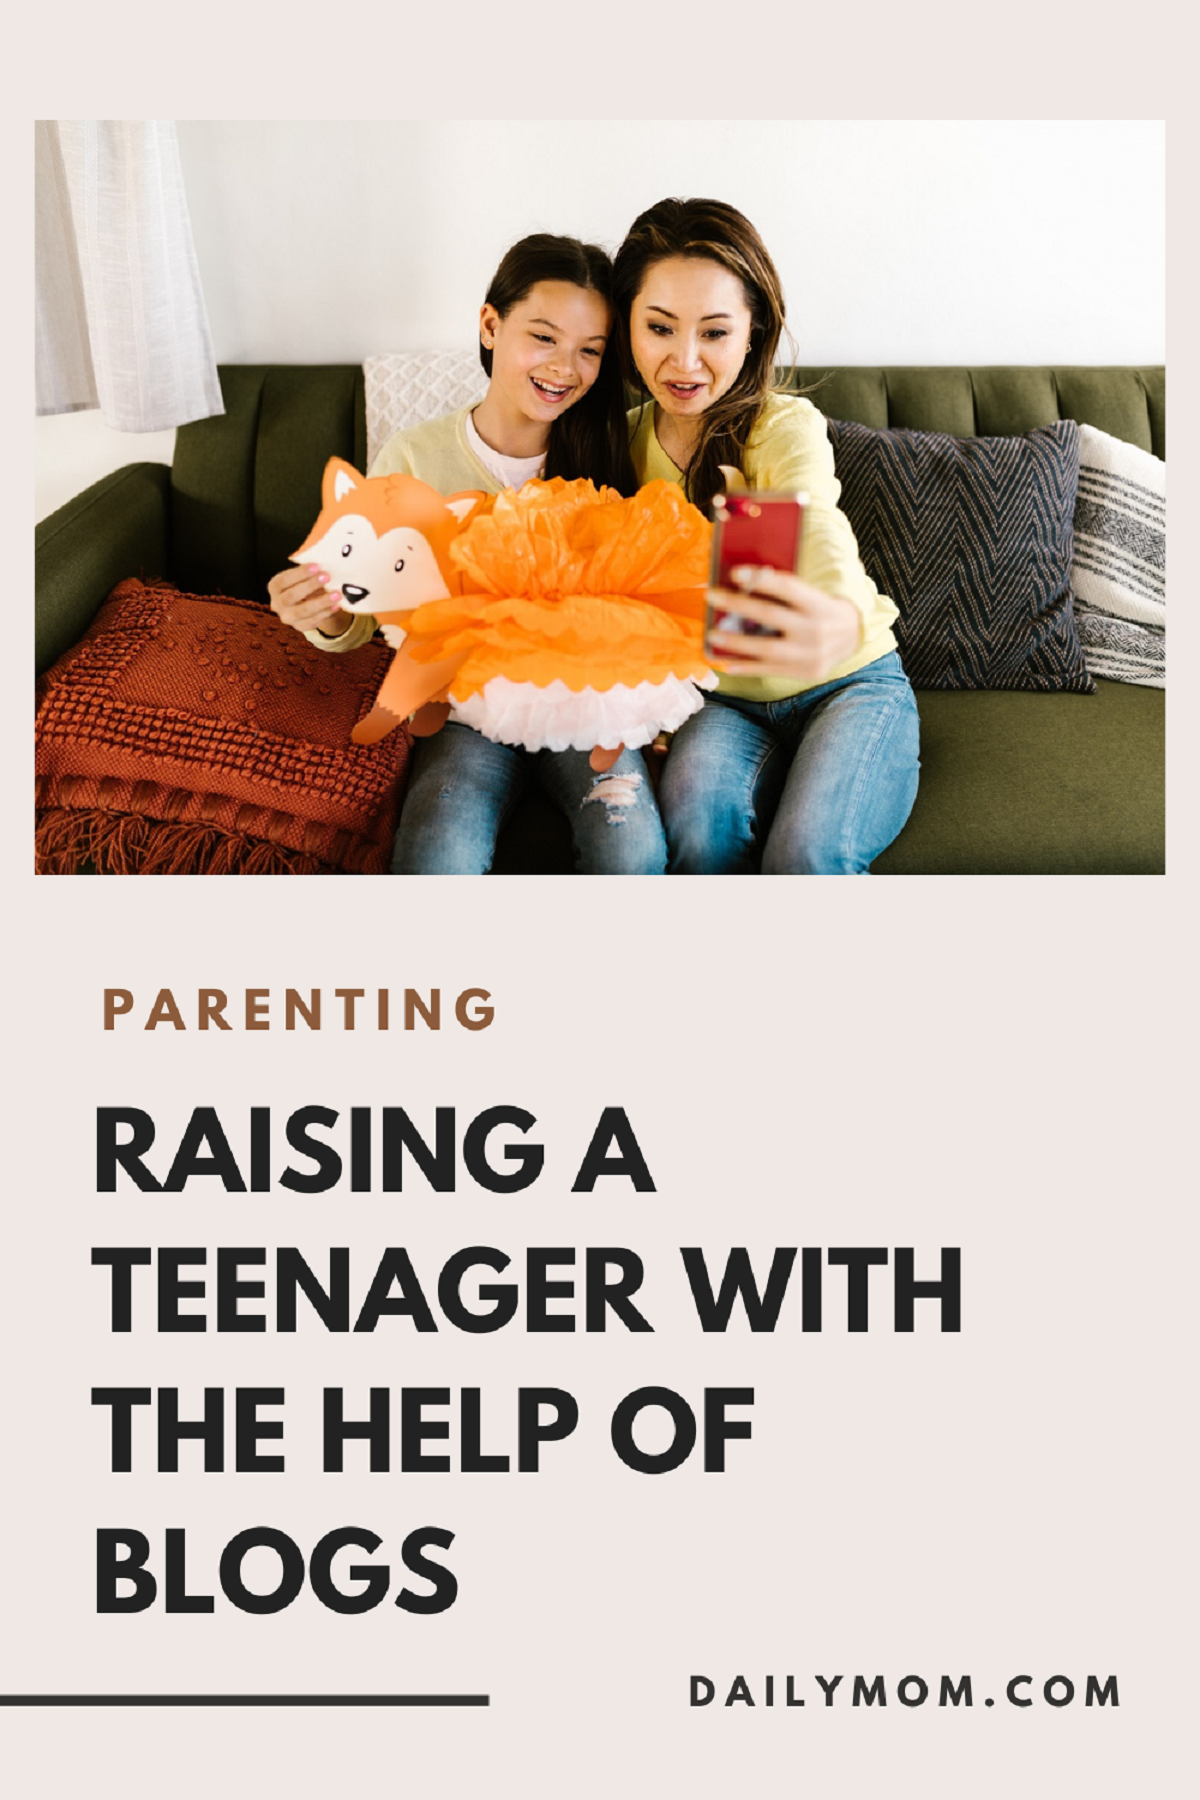 Raising A Teenager: Why Parenting Blogs Are Worthwhile